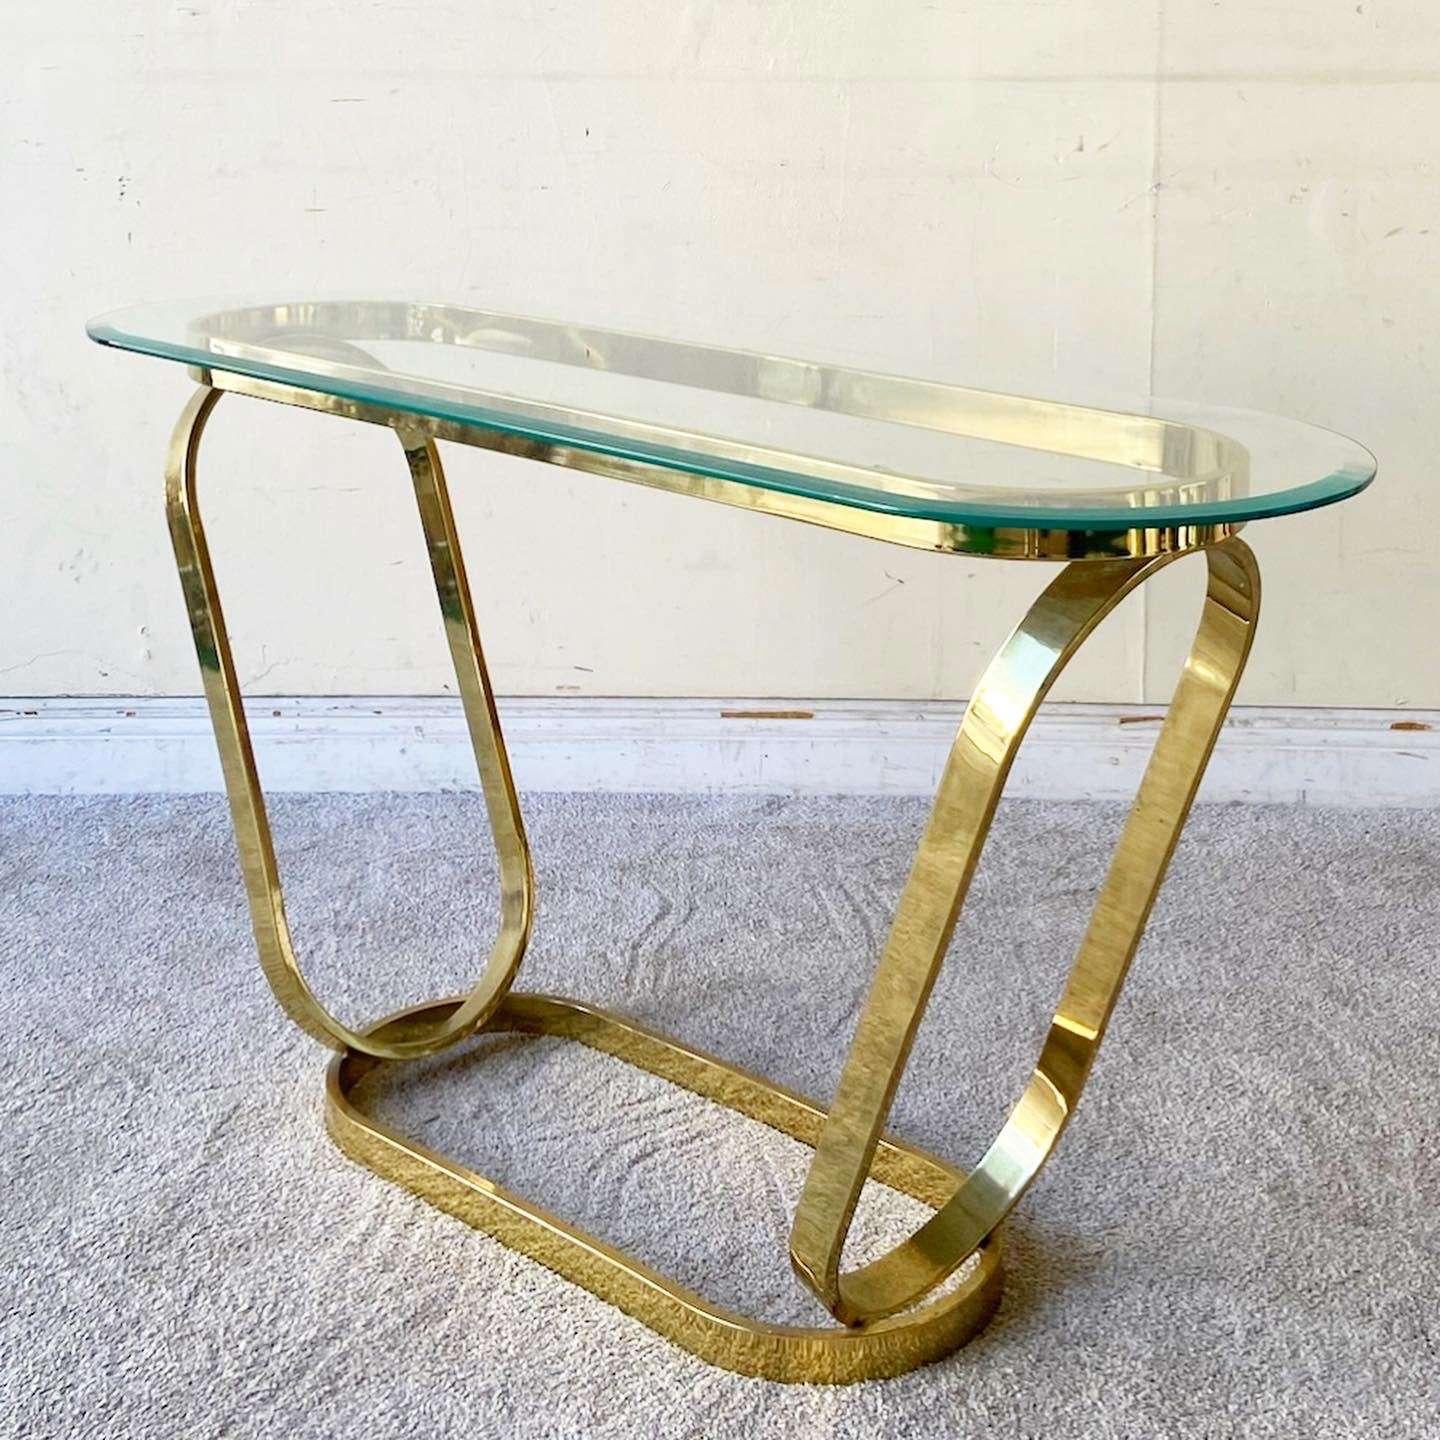 Incredible vintage Hollywood regency console table. Table is comprised of 4 gold finished ovals with a beveled glass top.